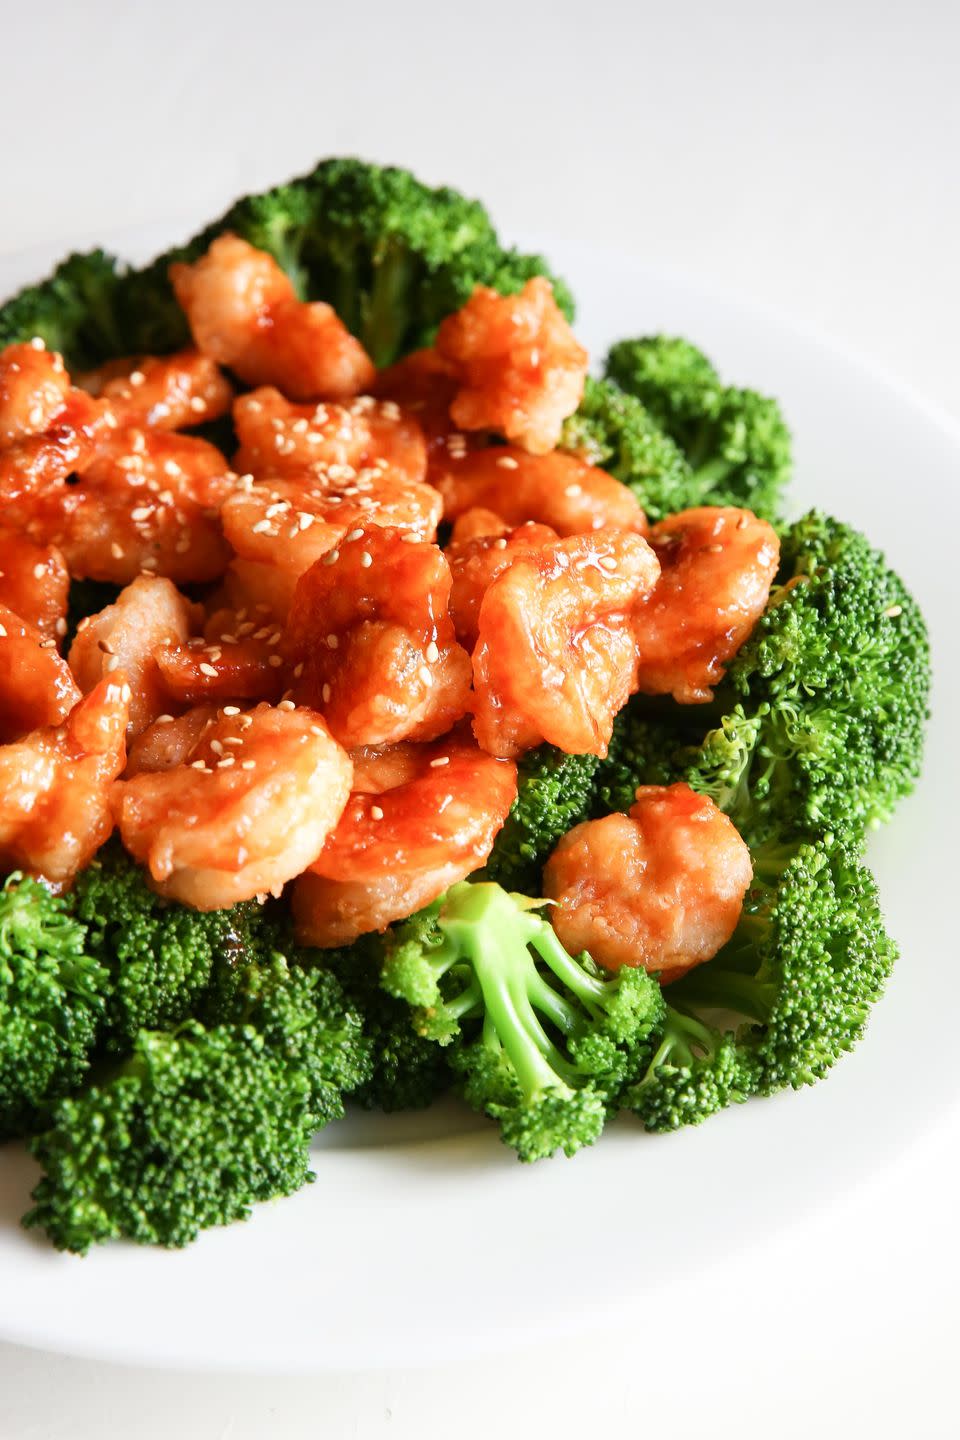 <p>There's more to life than chicken.</p><p>Get the recipe from <a href="https://www.delish.com/cooking/recipe-ideas/recipes/a51932/general-tsos-shrimp-and-broccoli/" rel="nofollow noopener" target="_blank" data-ylk="slk:Delish" class="link ">Delish</a>.</p>